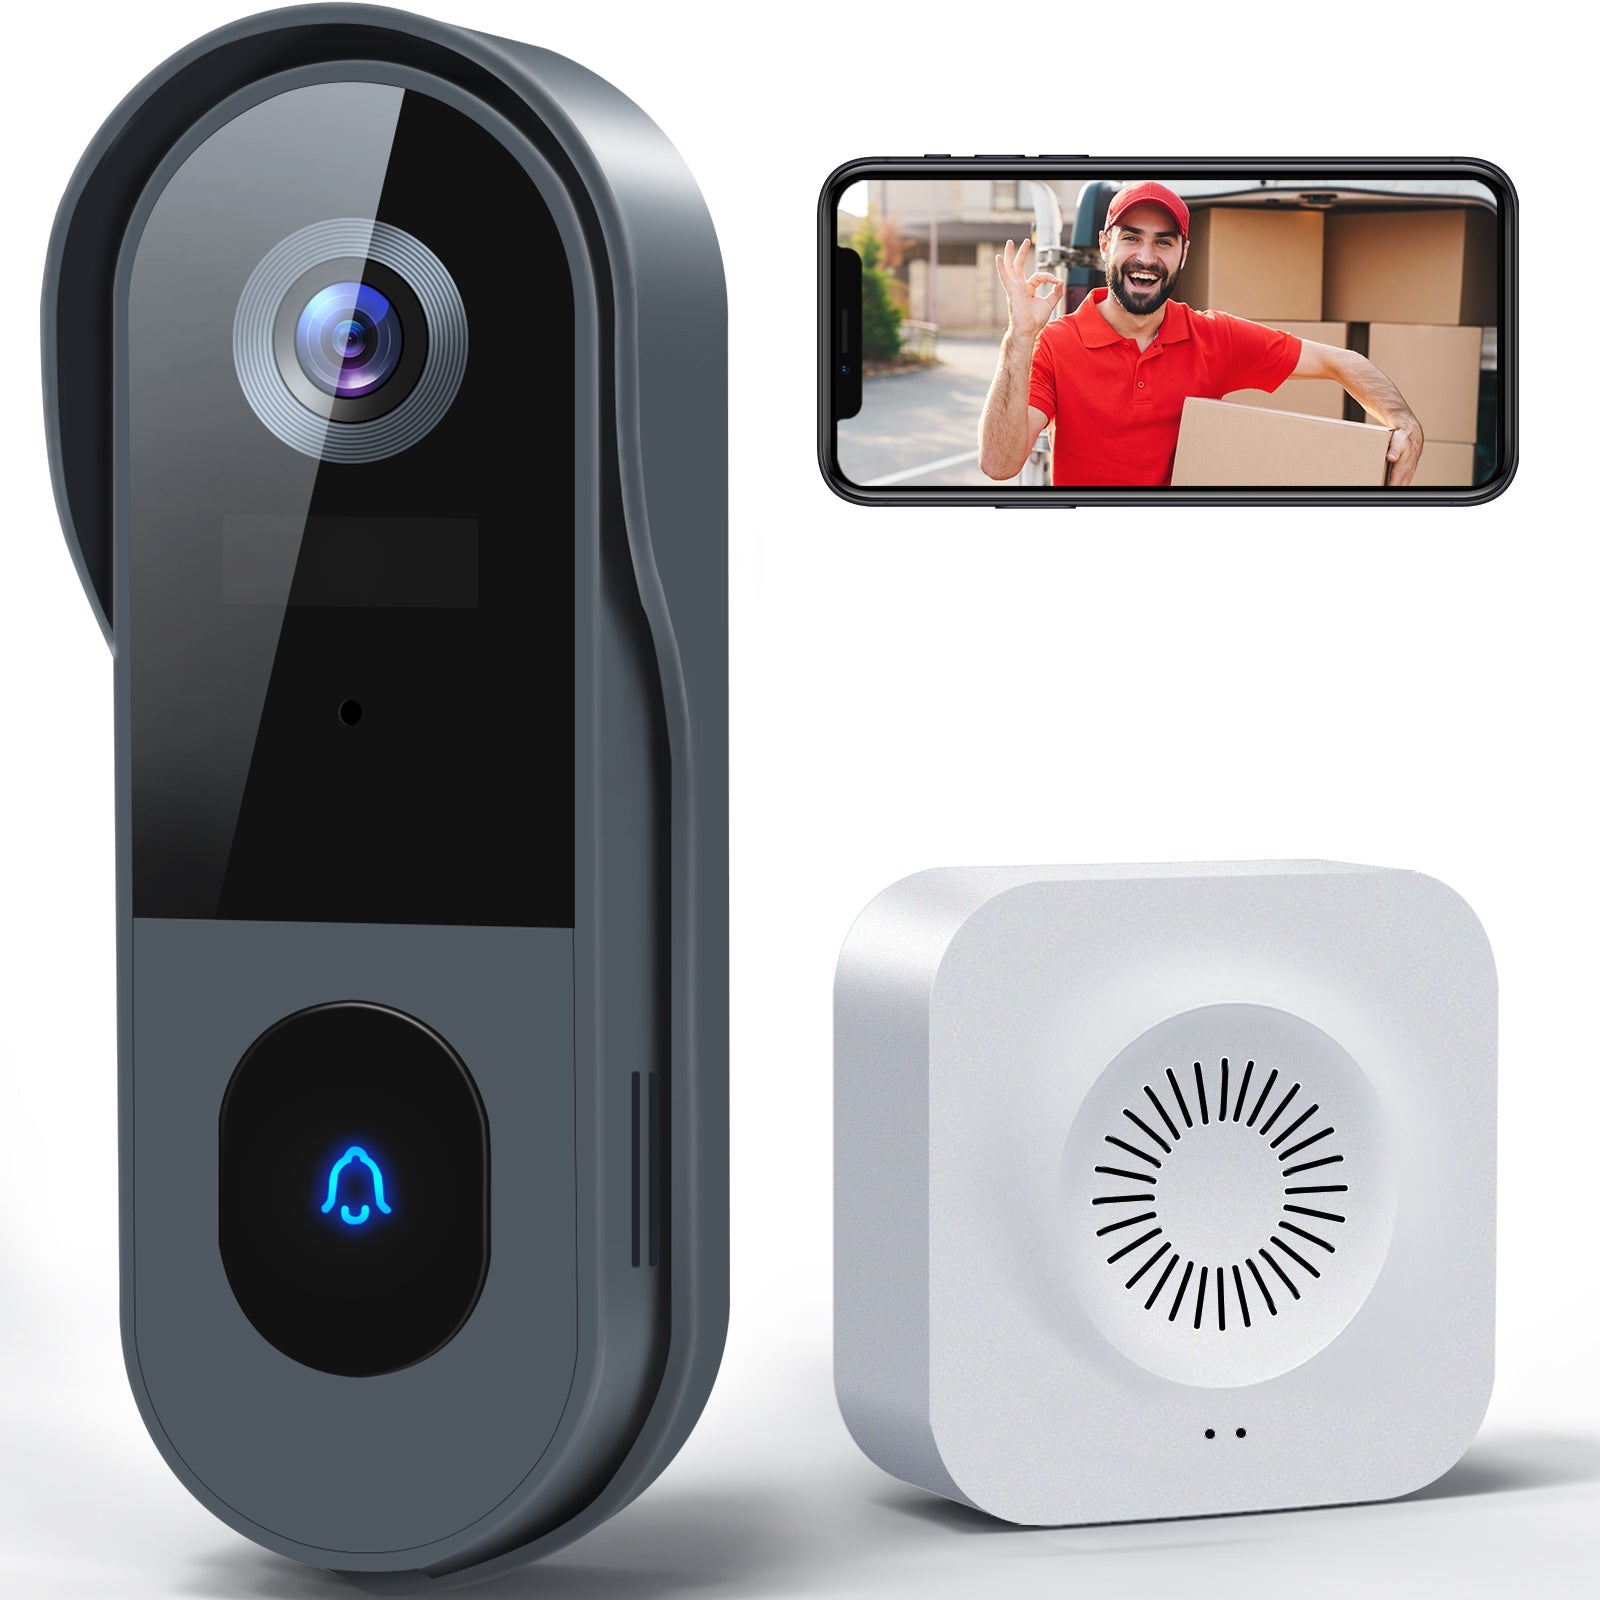 Wireless Doorbell Camera, XTU 1080P FHD Video Home Security WiFi Doorbell Camera with Chime, PIR Motion Detection, Anti-Theft Trigger, Night Vision, IP66, 2 Way Audio, Cloud Storage, Easy Installation